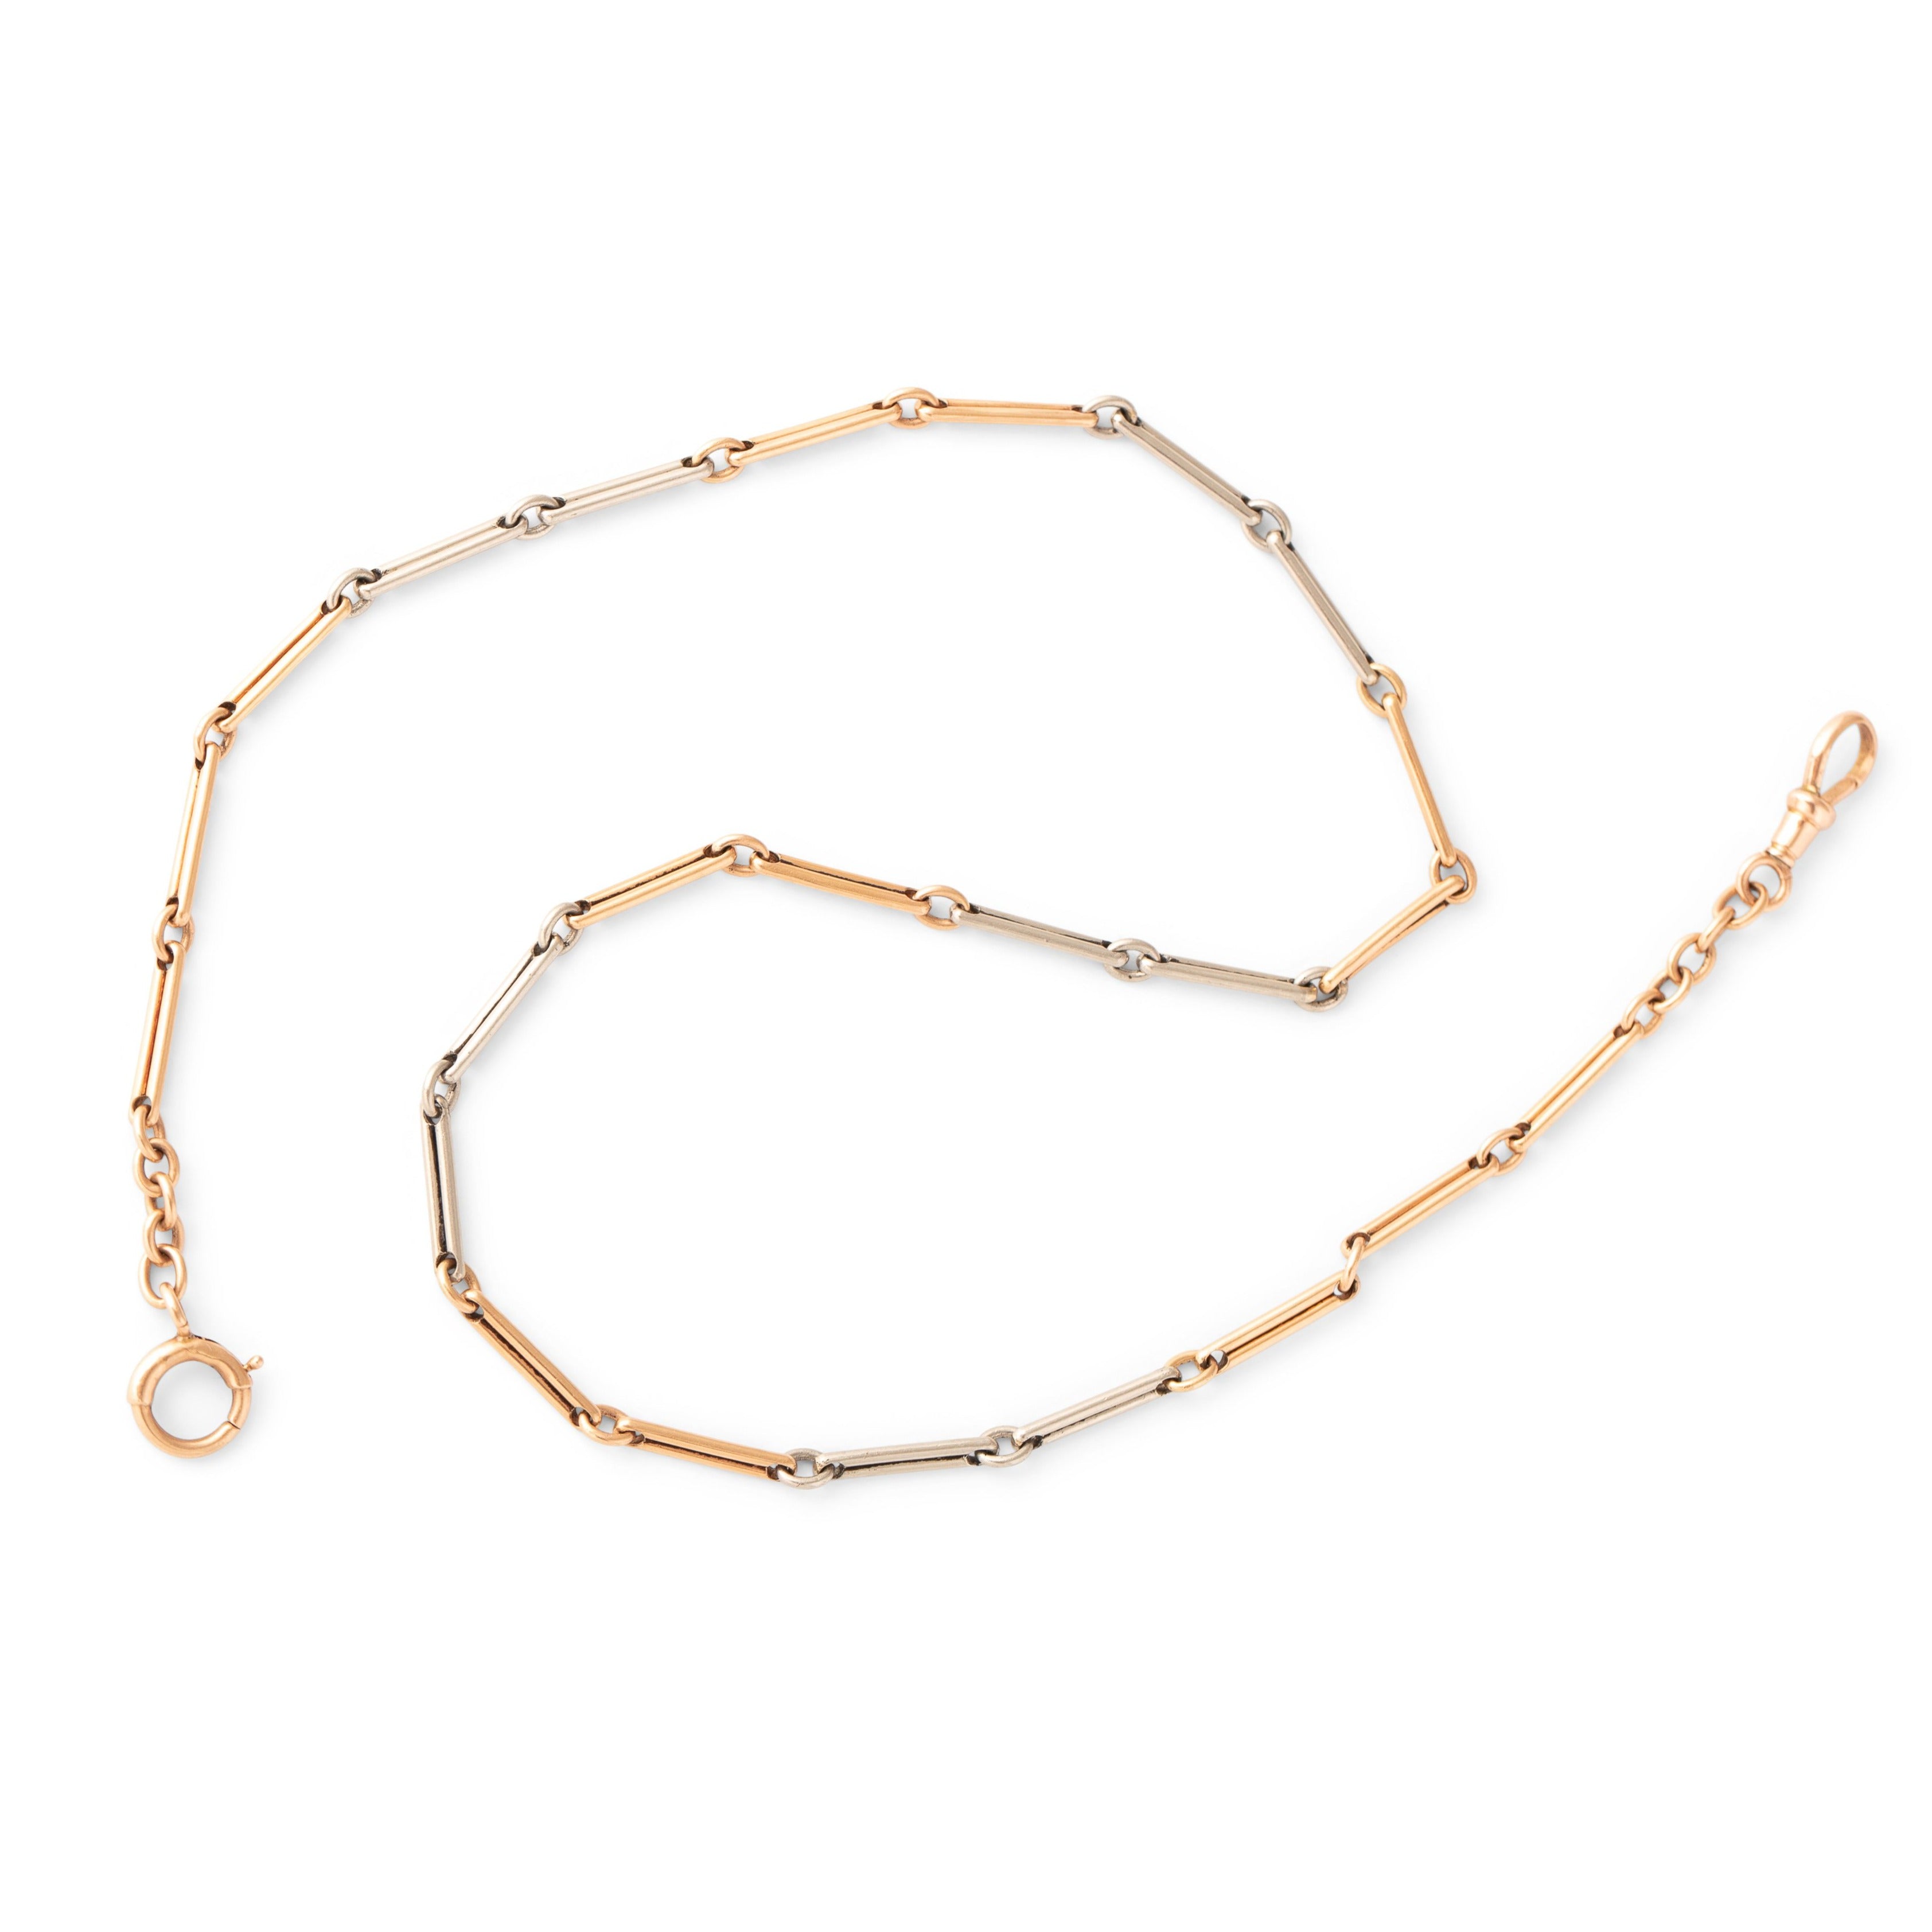 Platinum and 14K Rose Gold Choker 14" Chain Necklace